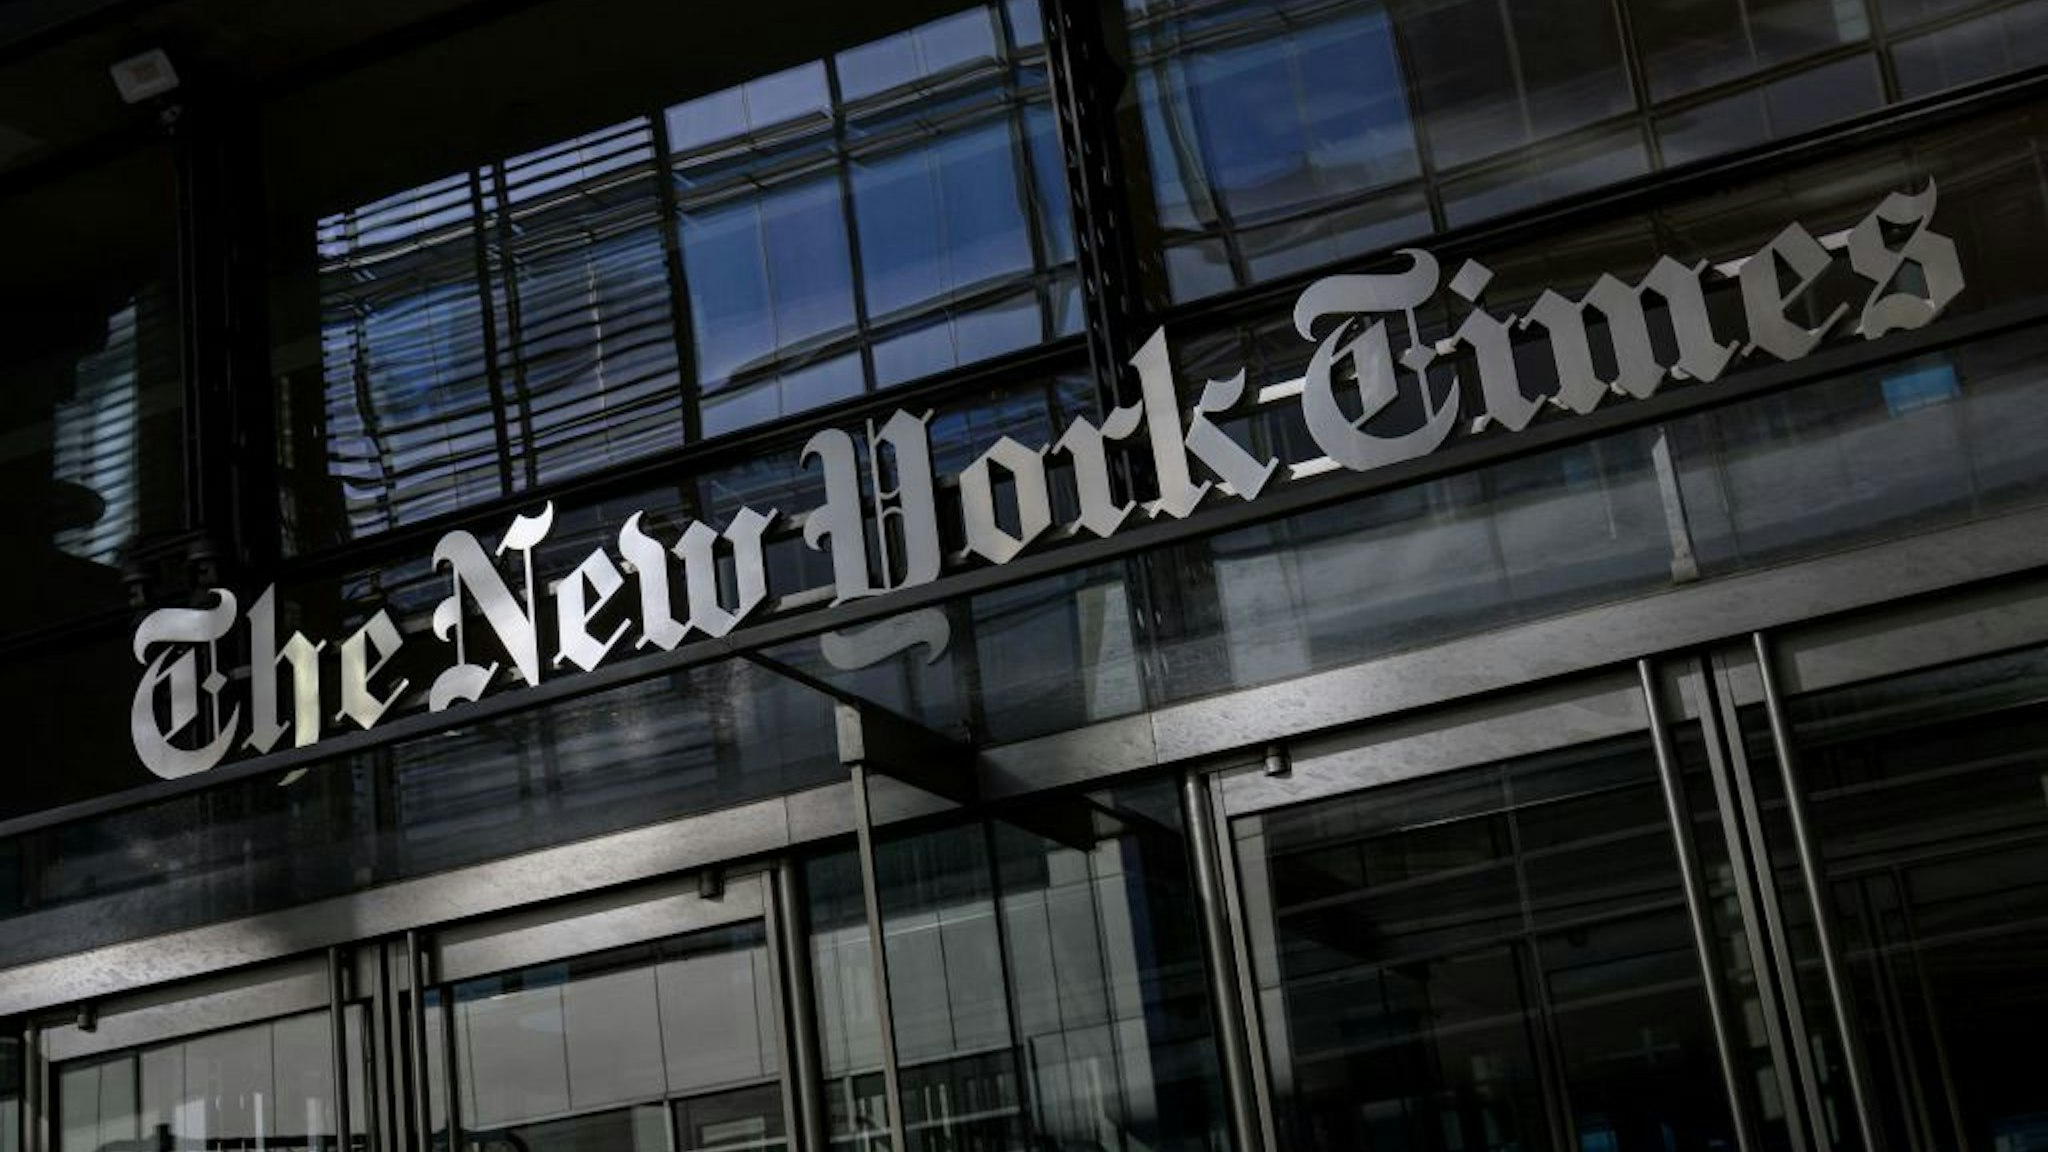 The New York Times Building in New York City on February 1, 2022. - The New York Times announced on January 31, 2022, it had bought Wordle, a phenomenon played by millions just four months after the game burst onto the Internet, for an "undisclosed price in the low seven figures." Created by engineer Josh Wardle, the game consists of guessing one five-letter word per day in just six tries. (Photo by ANGELA WEISS / AFP) (Photo by ANGELA WEISS/AFP via Getty Images)